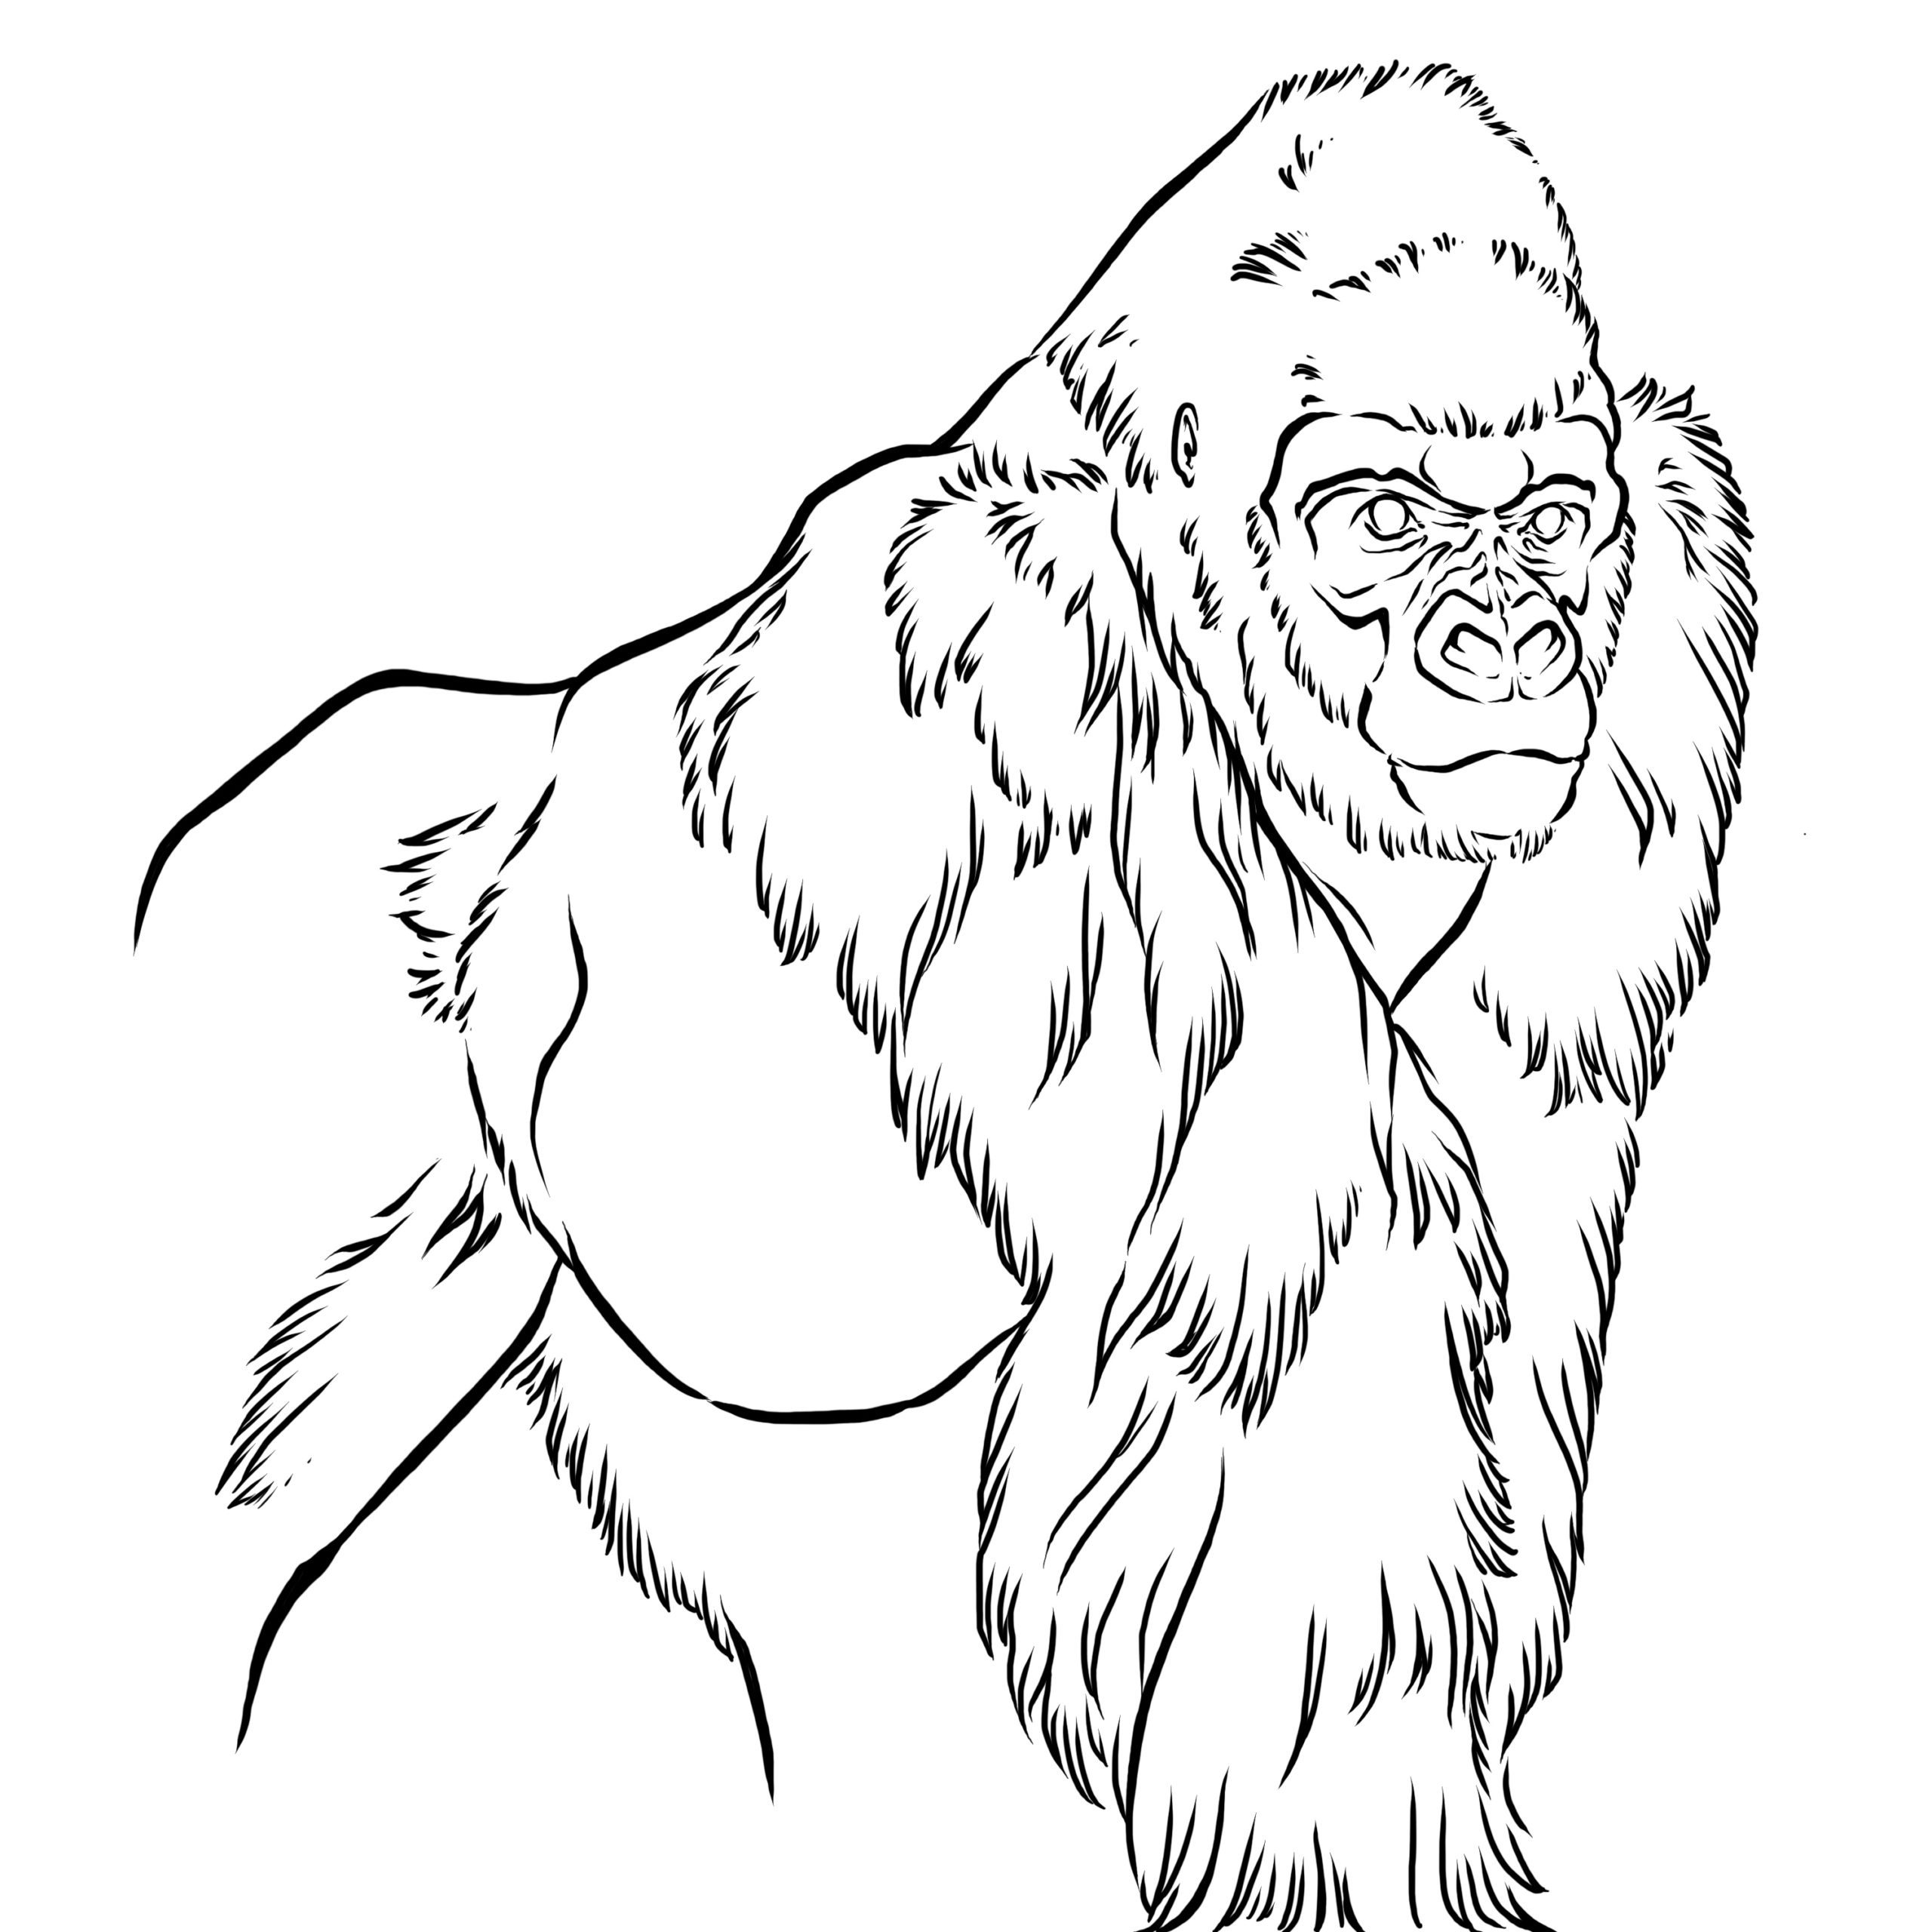 Black and white line drawing of a gorilla